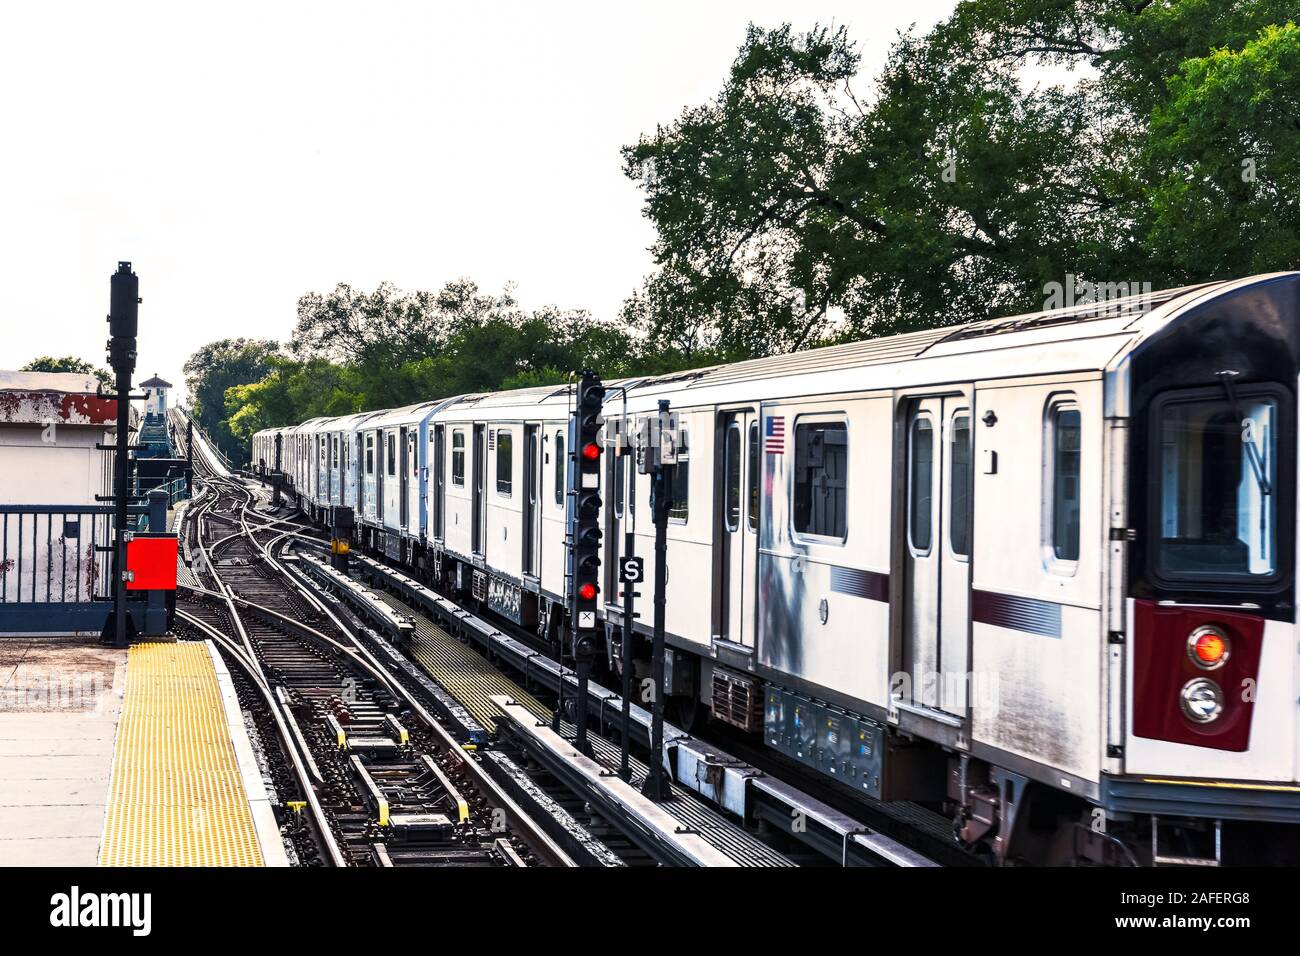 Train arriving at Mets - Willets Point train station. Transportation and City concept. New York City. United States. Stock Photo